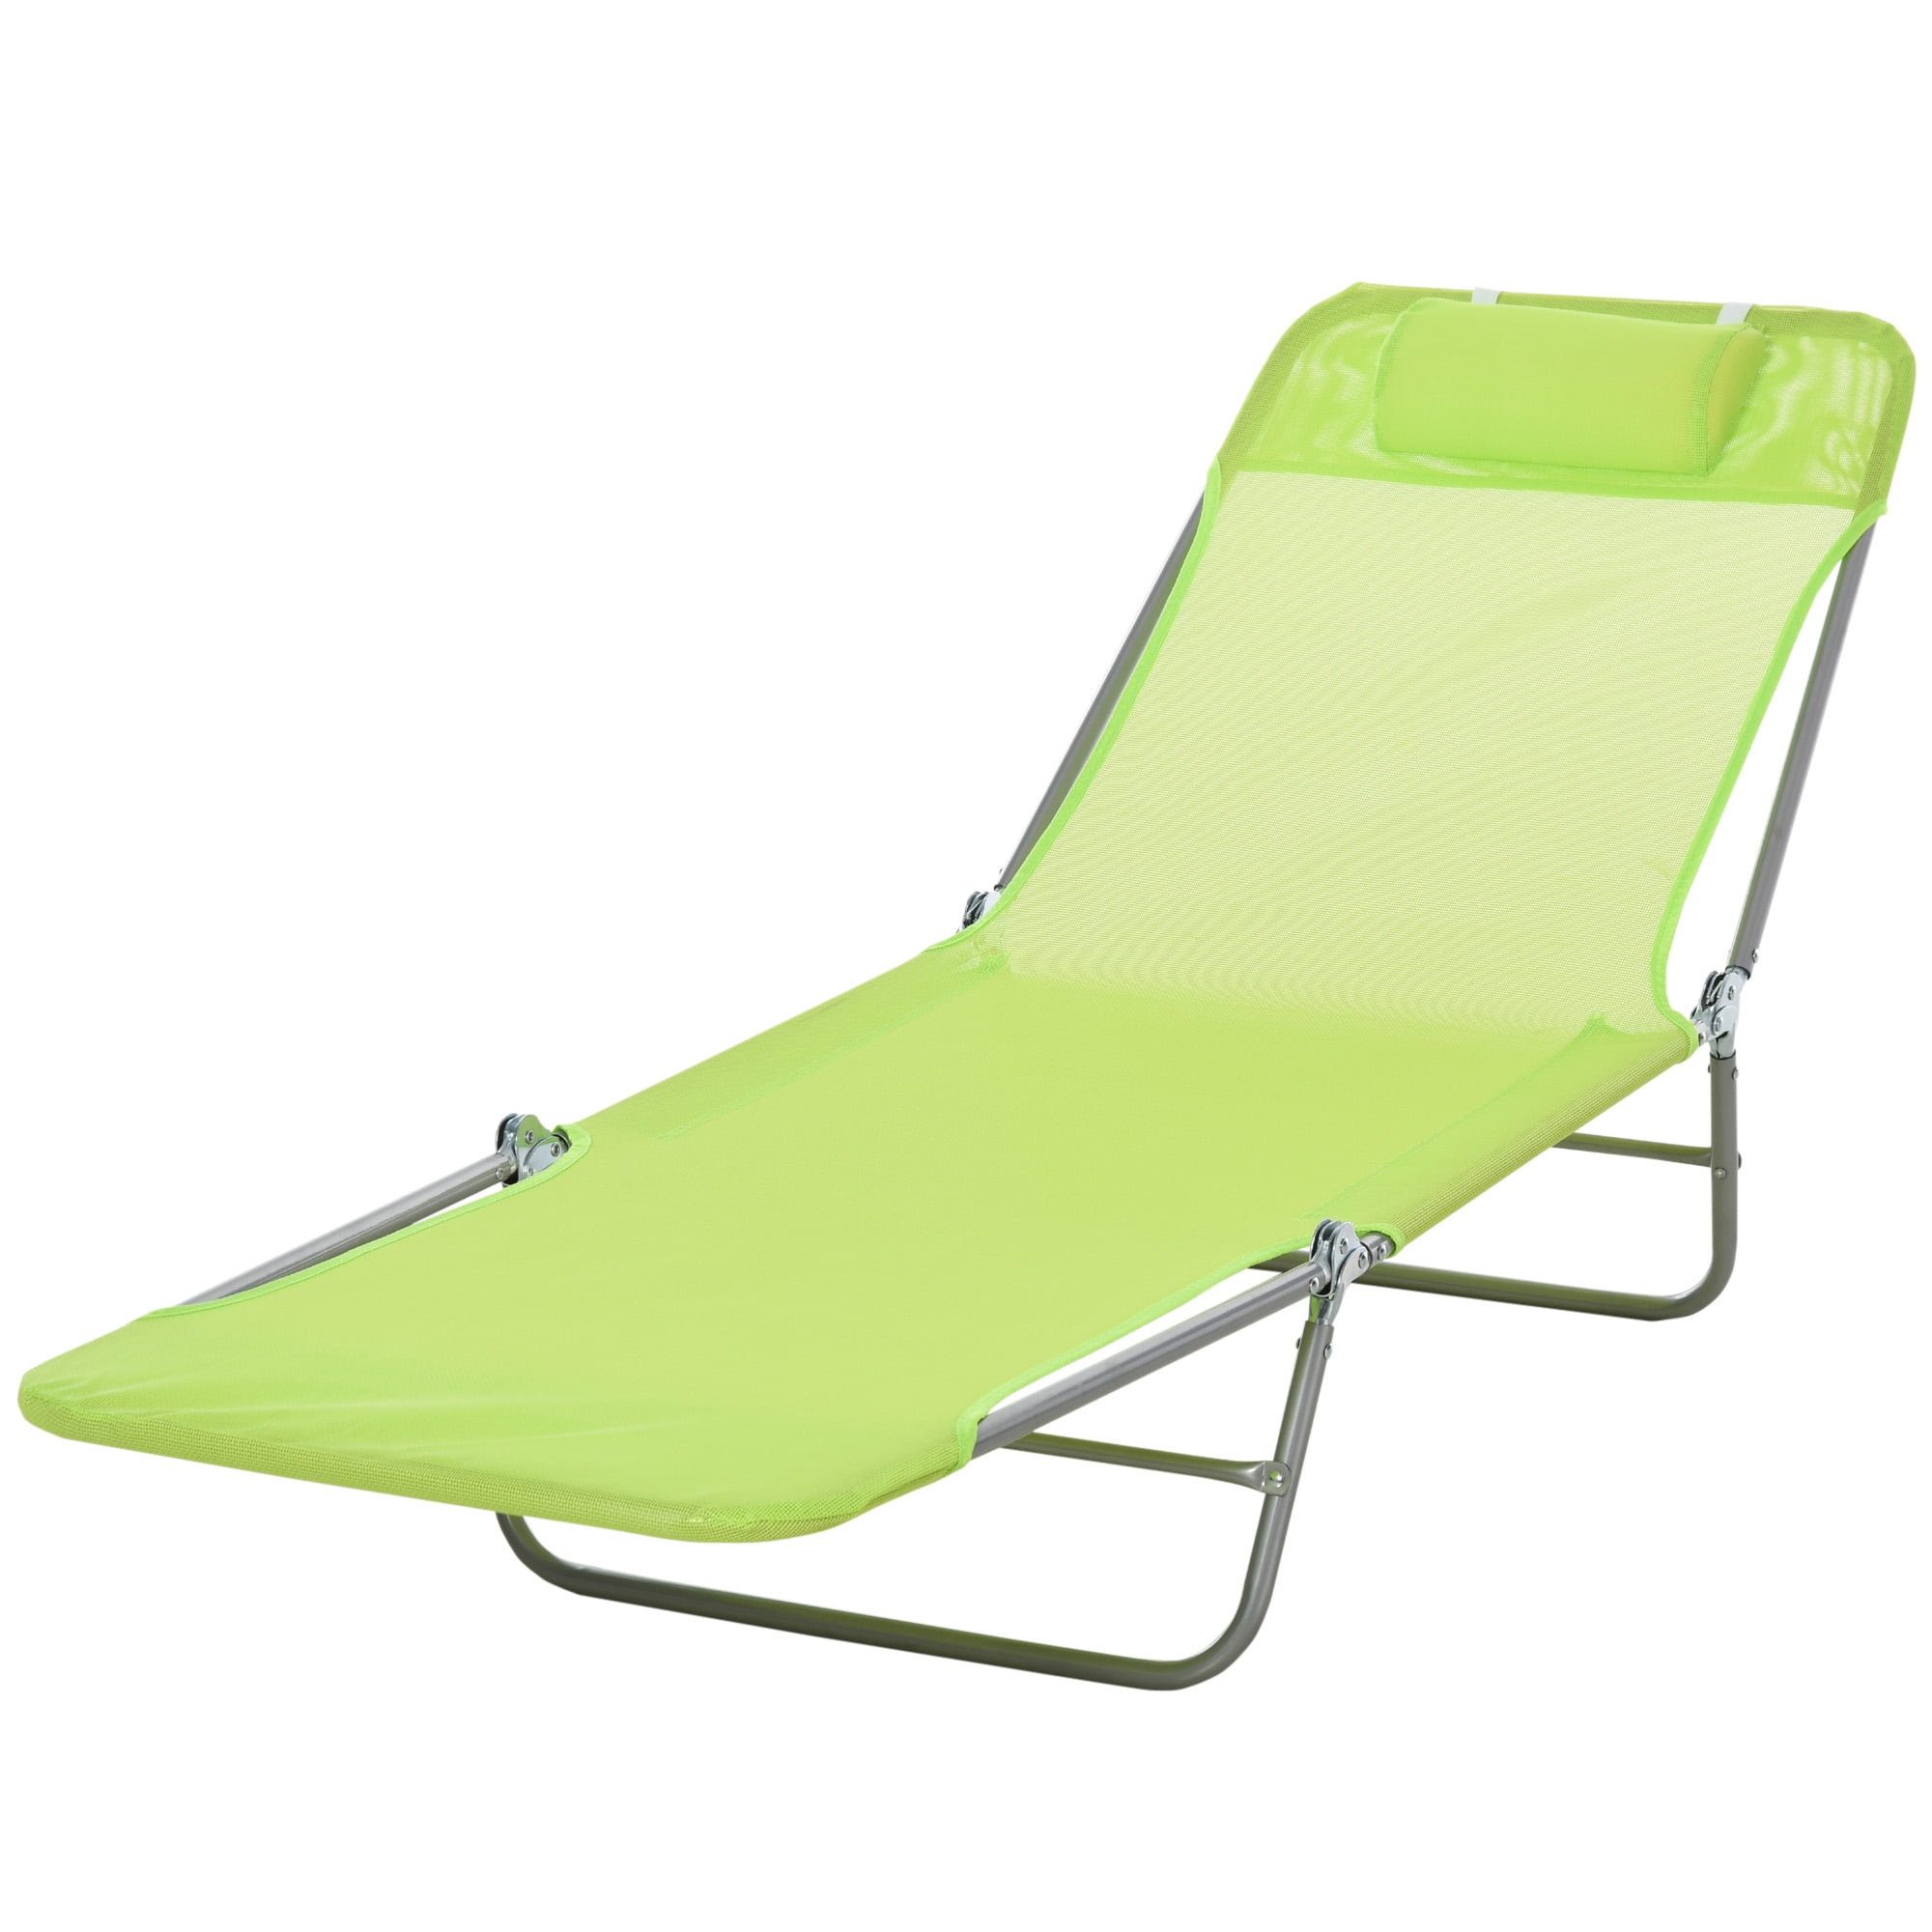 Outsunny Outdoor Folding Chaise Lounge Sun Recliner Chair Beach Patio